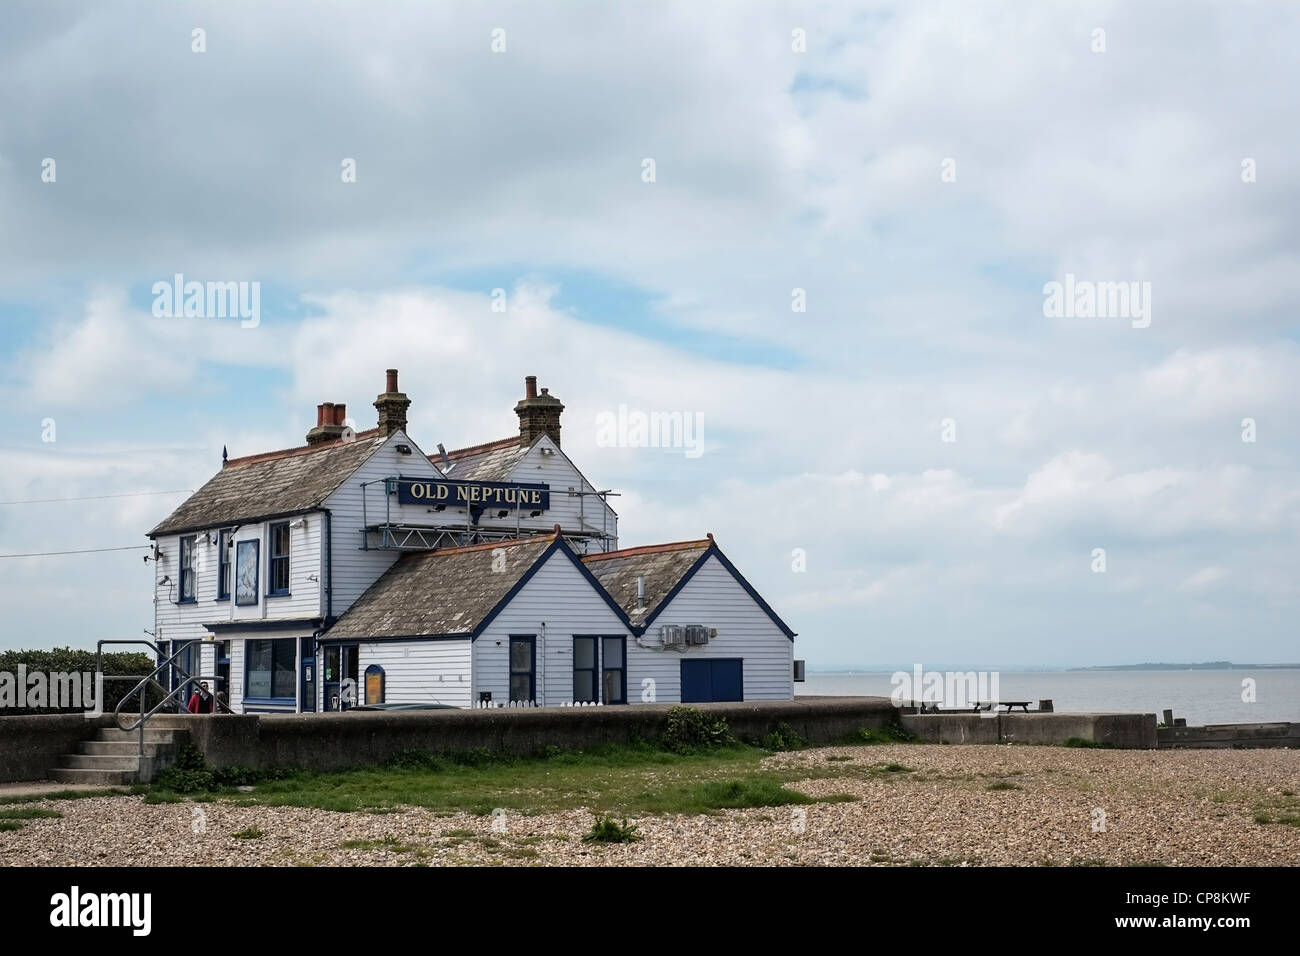 The Old Neptune Pub on the Beach, Whitstable, Kent, UK. Stock Photo